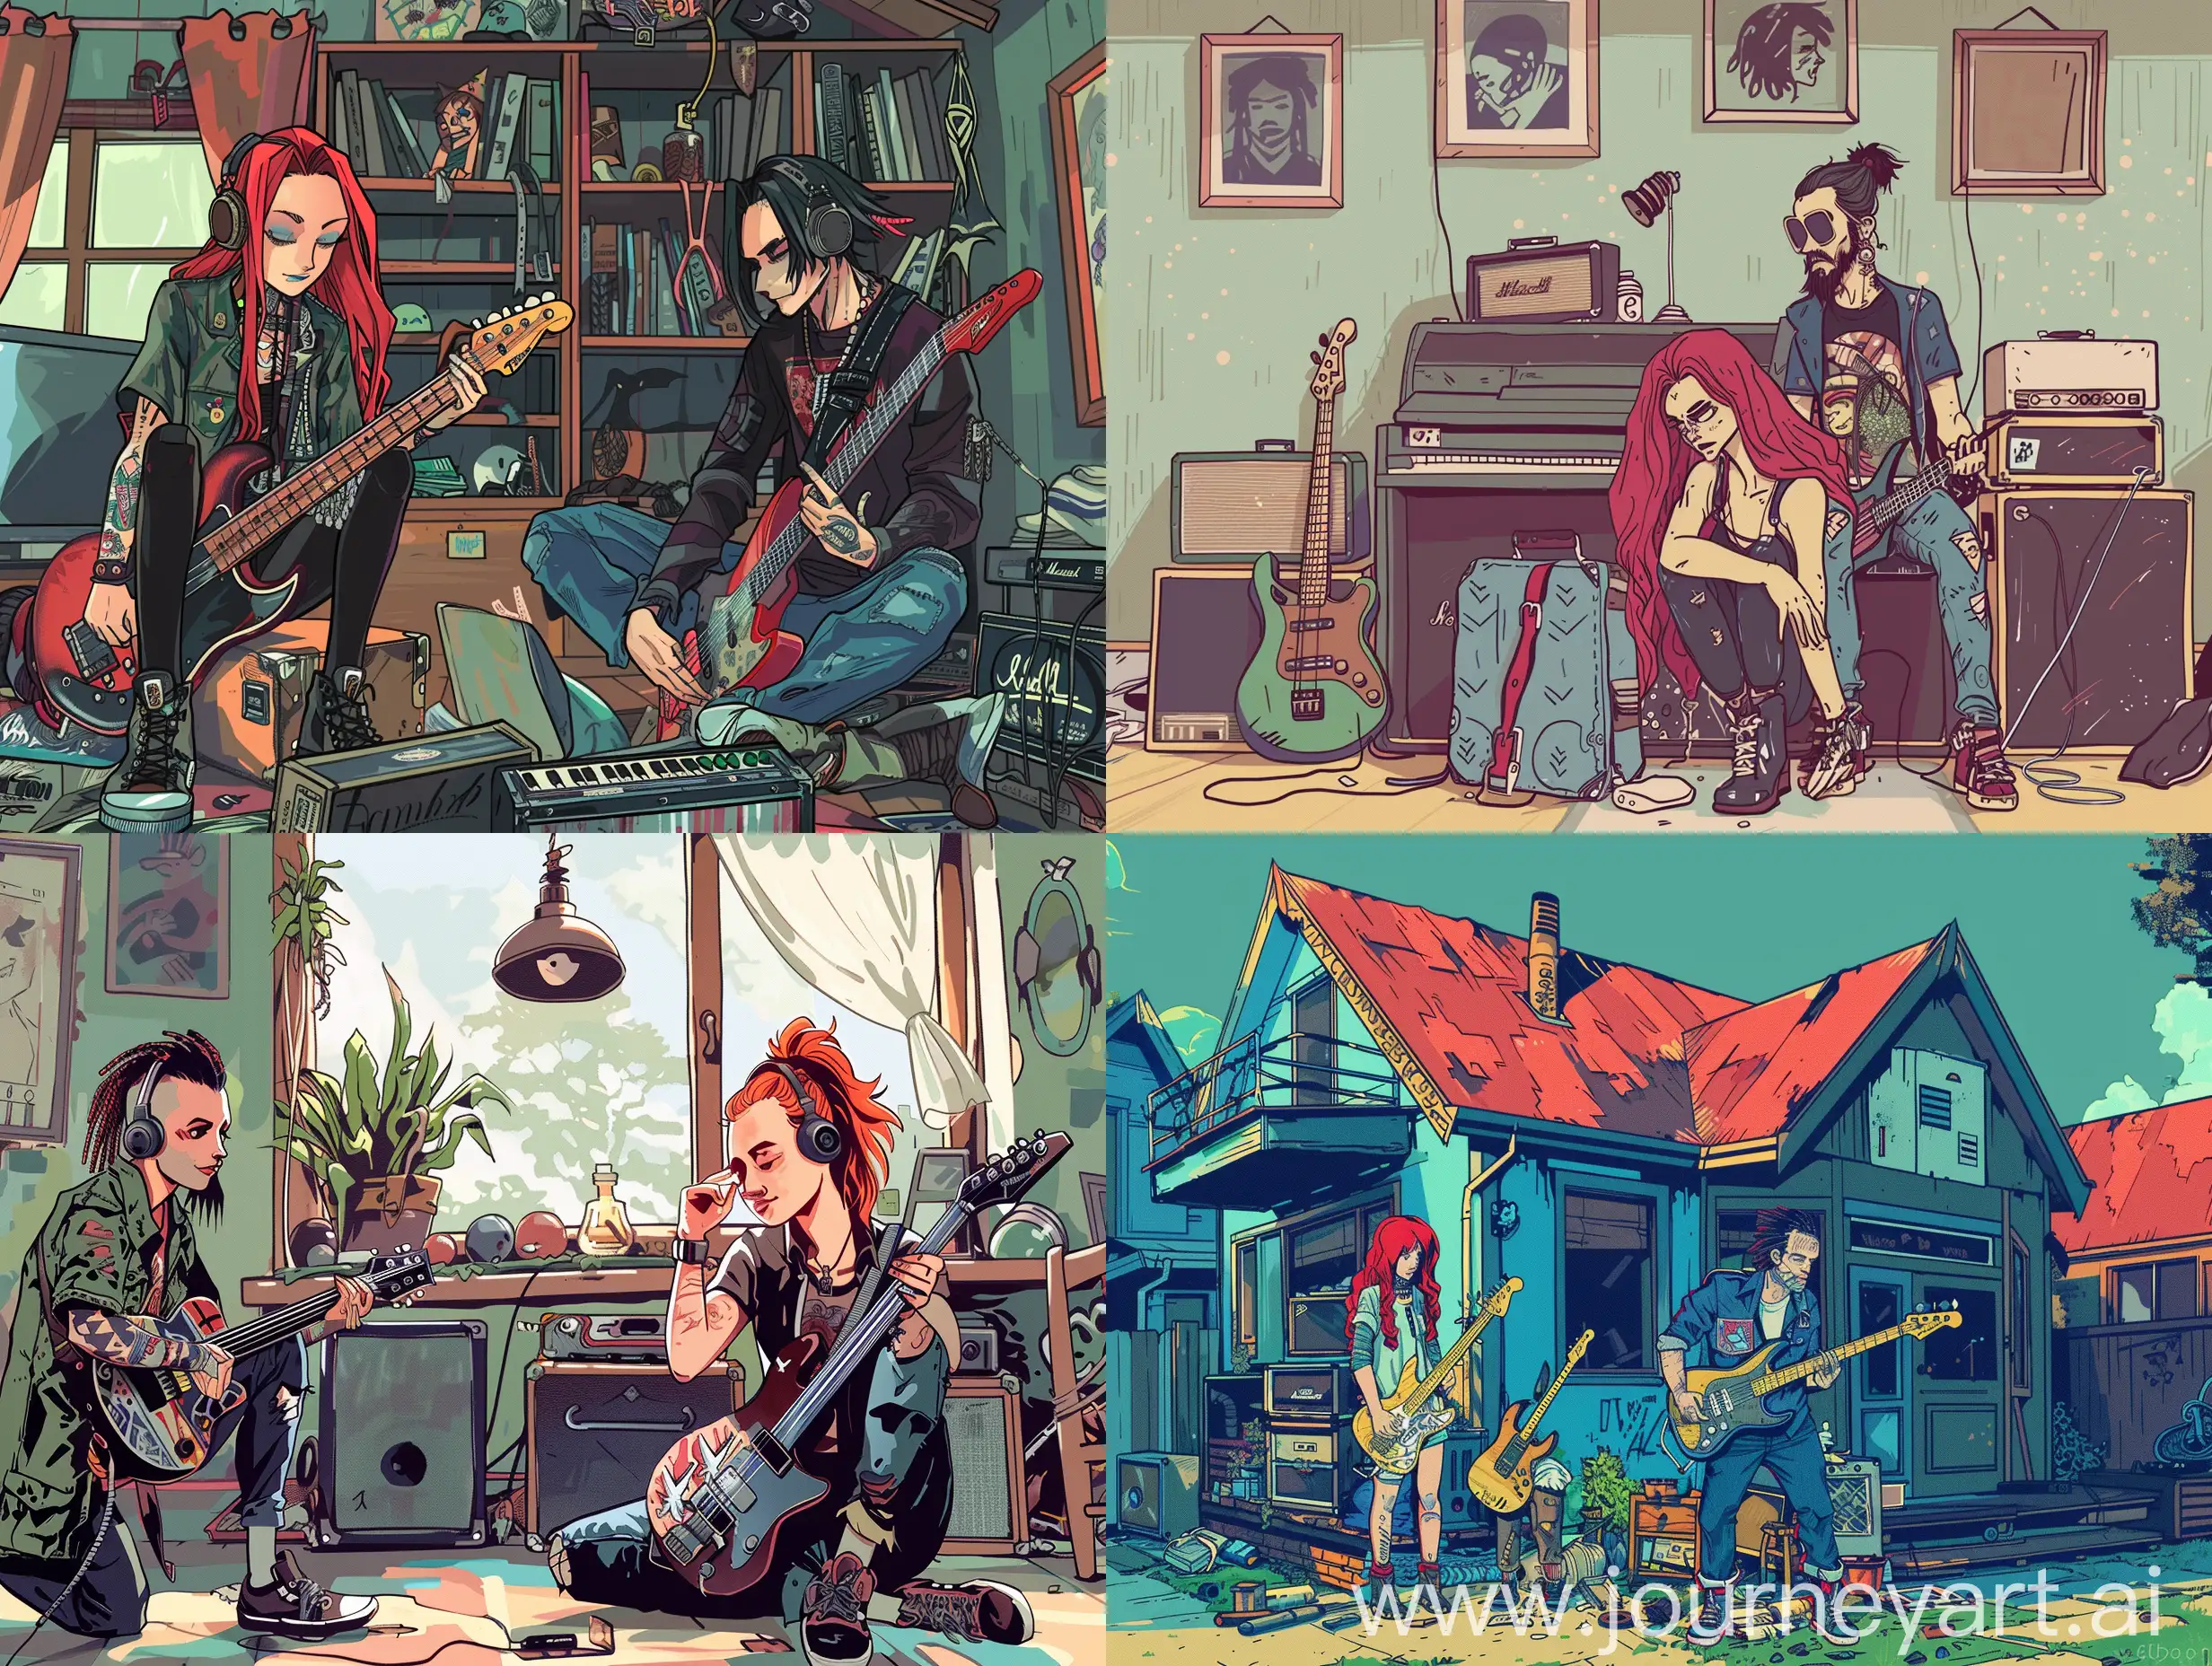 Creative-Collaboration-RedHaired-Girl-and-Metalhead-Building-a-Unique-House